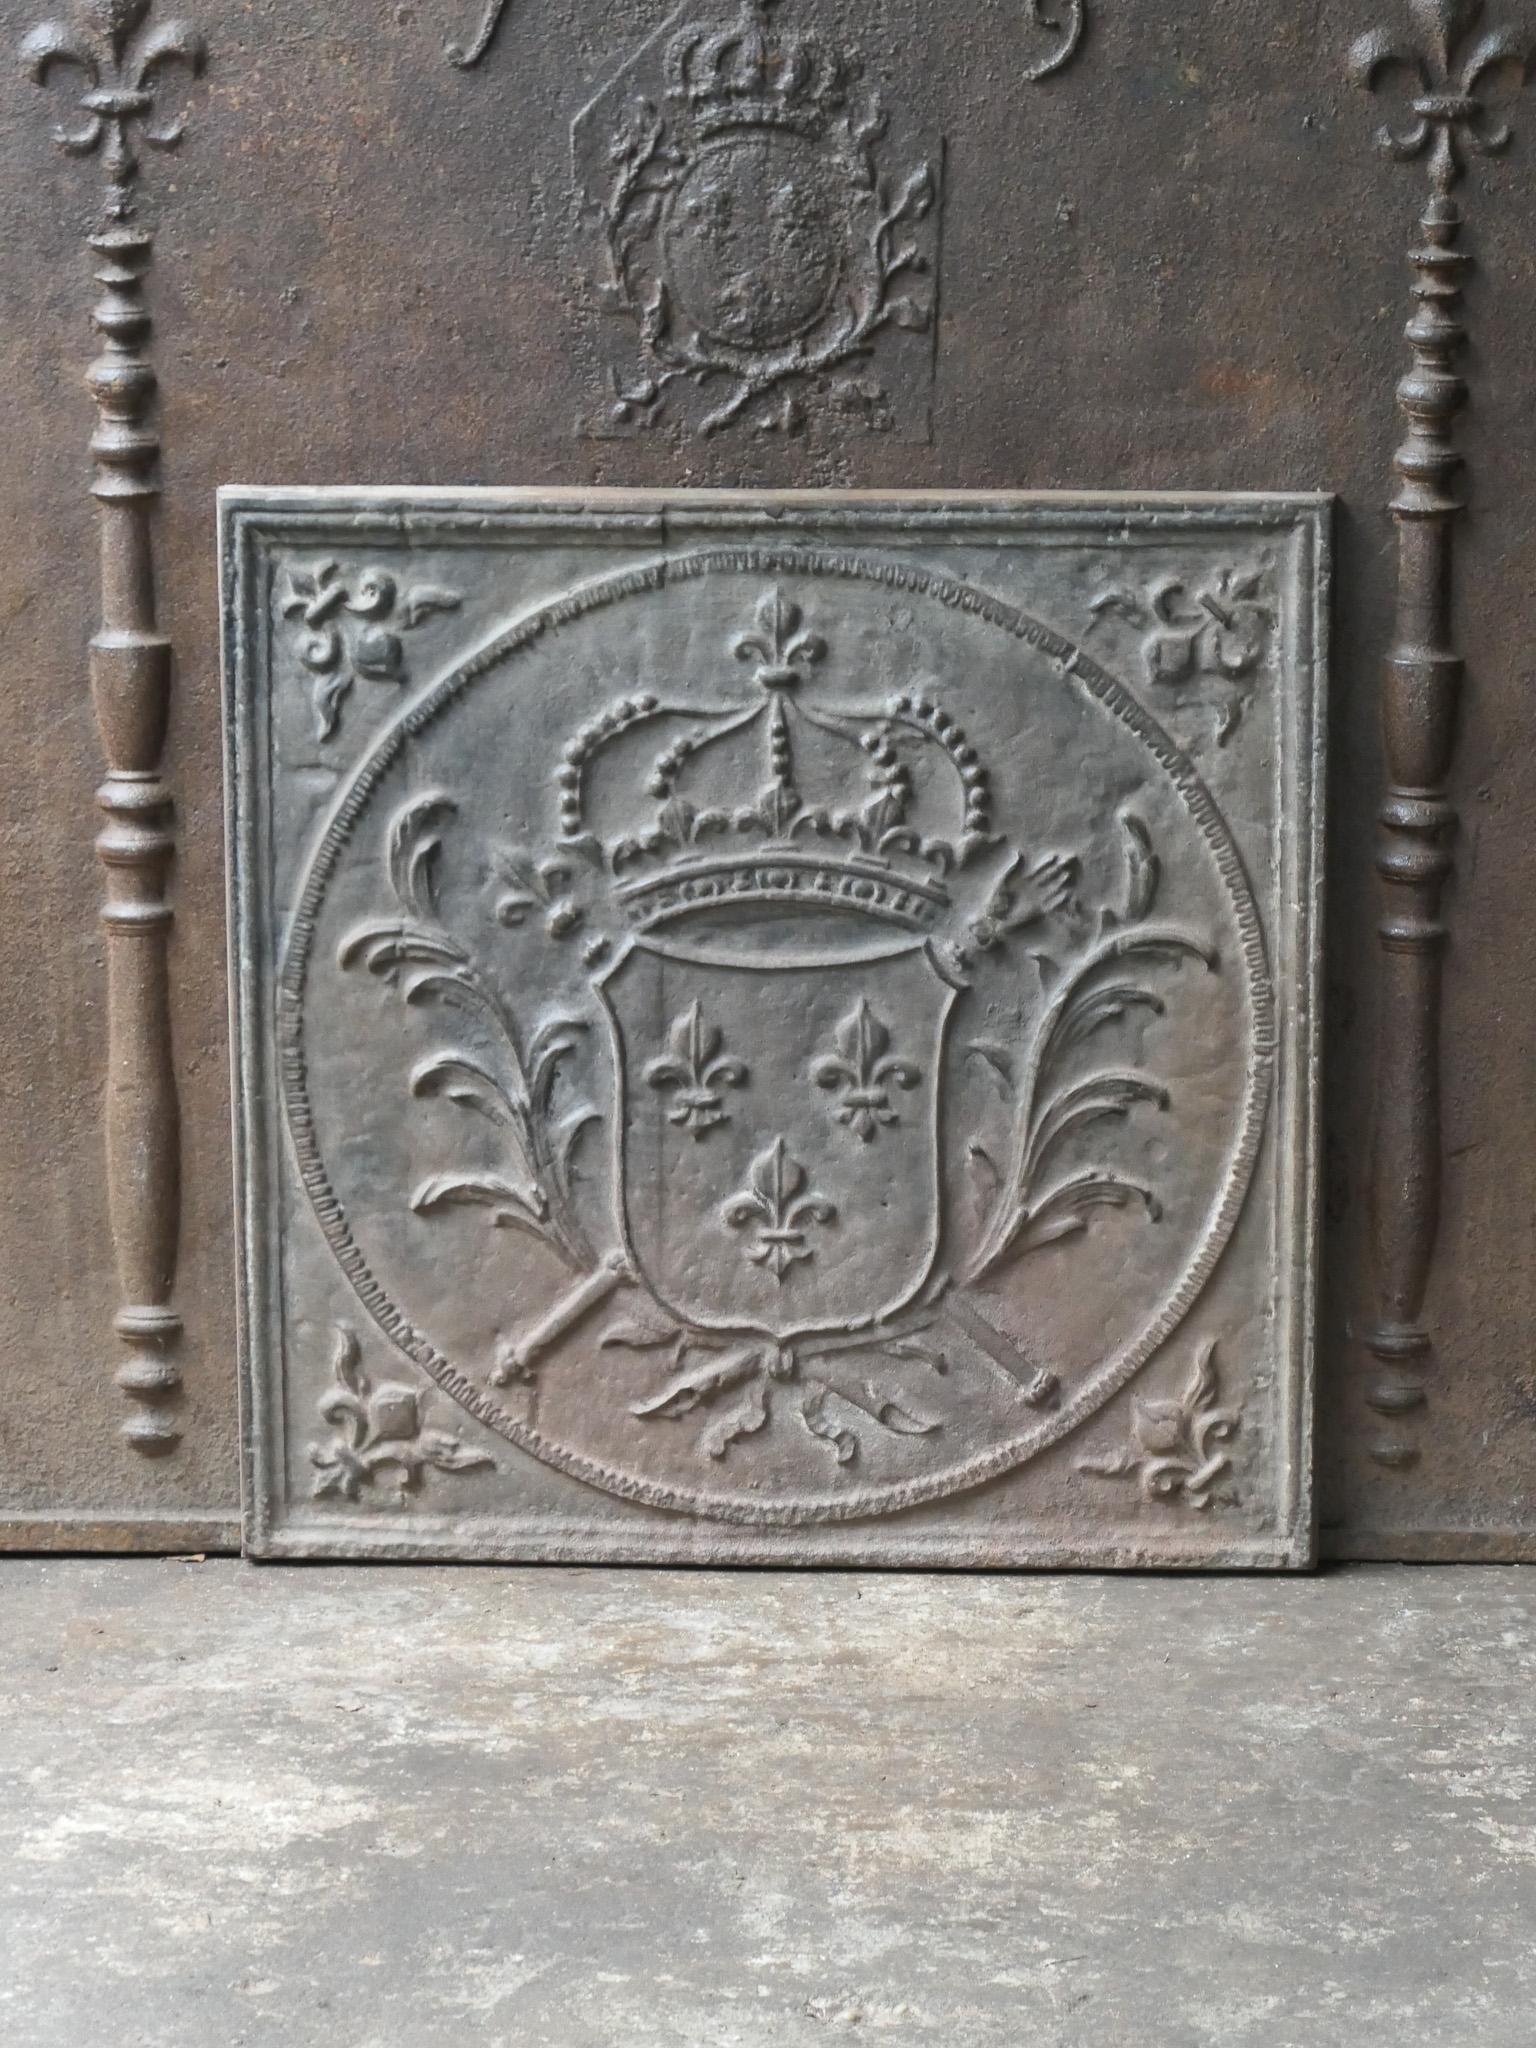 Beautiful 20th century French Louis XV style fireback with the arms of France. This is the coat of arms of the House of Bourbon, an originally French royal house that became a major dynasty in Europe. It delivered kings for Spain (Navarra), France,